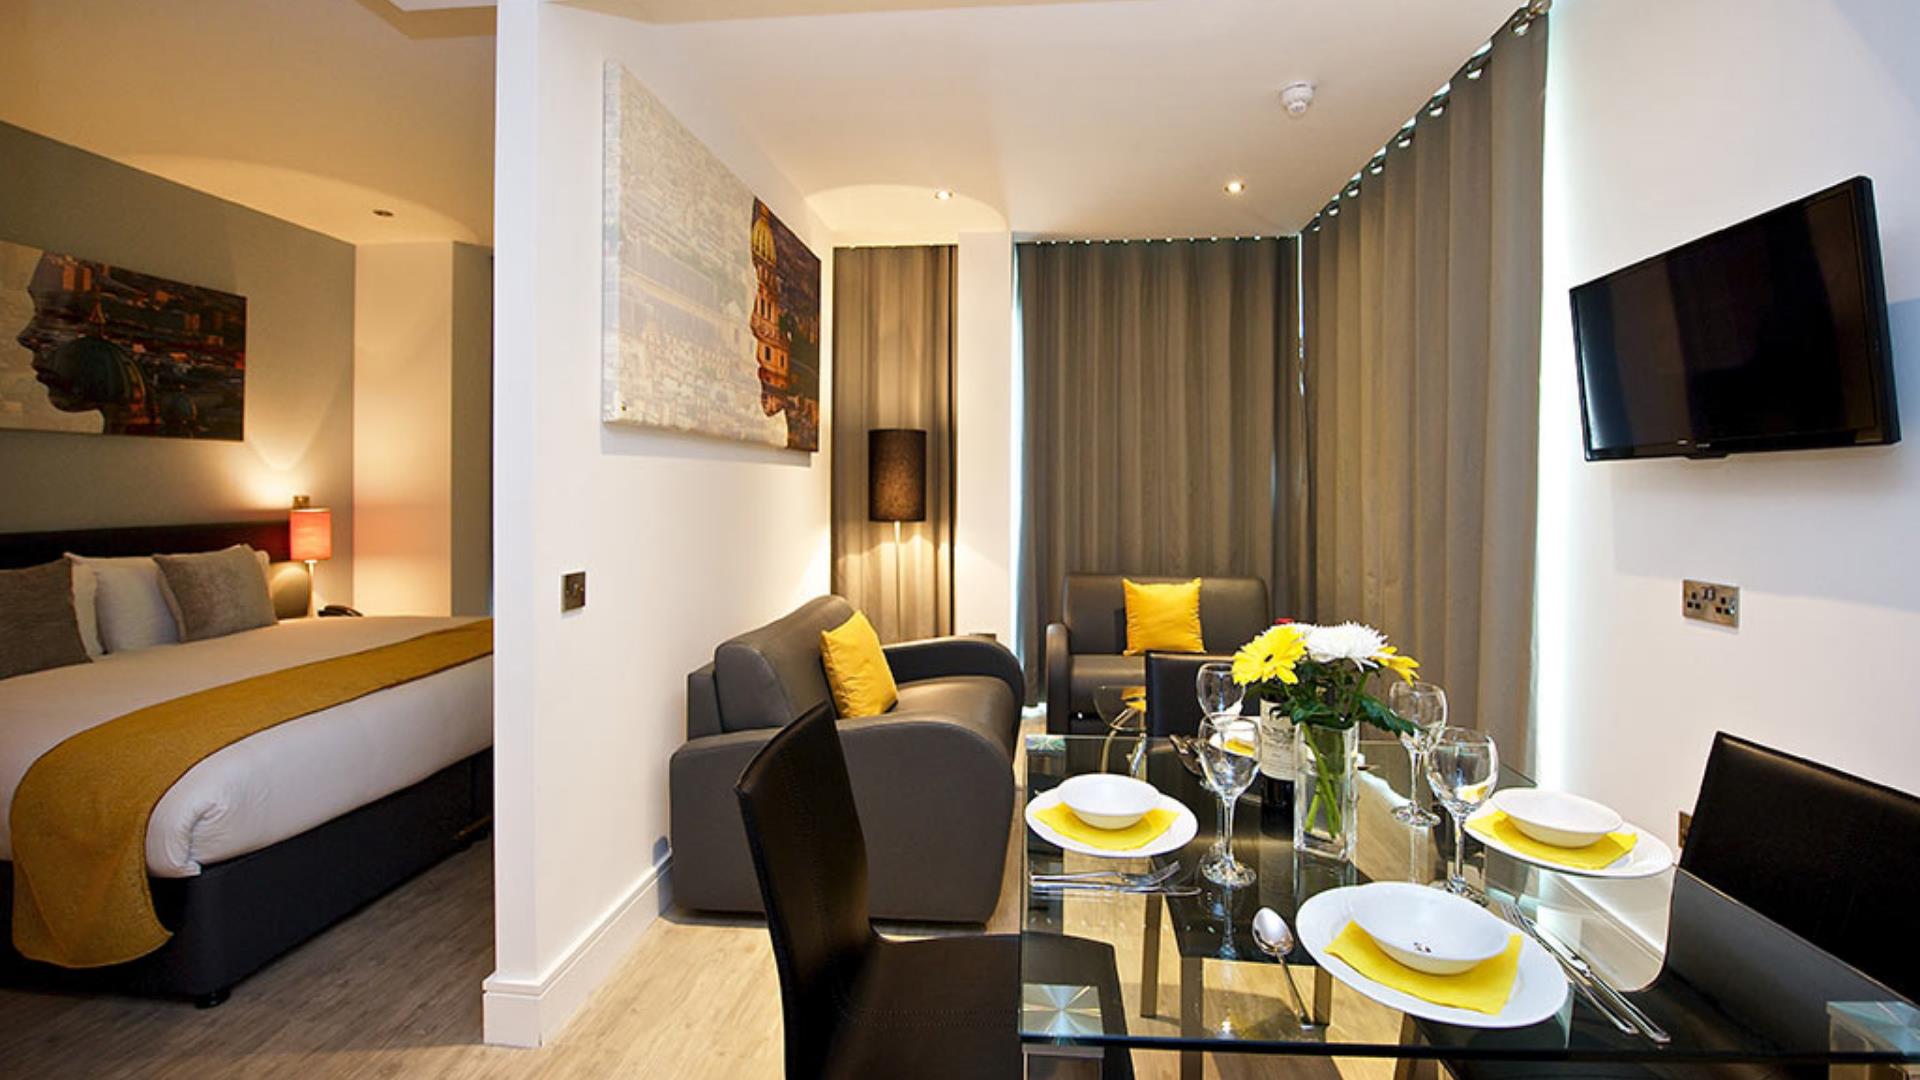 The stylish and modern self catering, serviced apartments at Staycity Aparthotels, Greenwich.